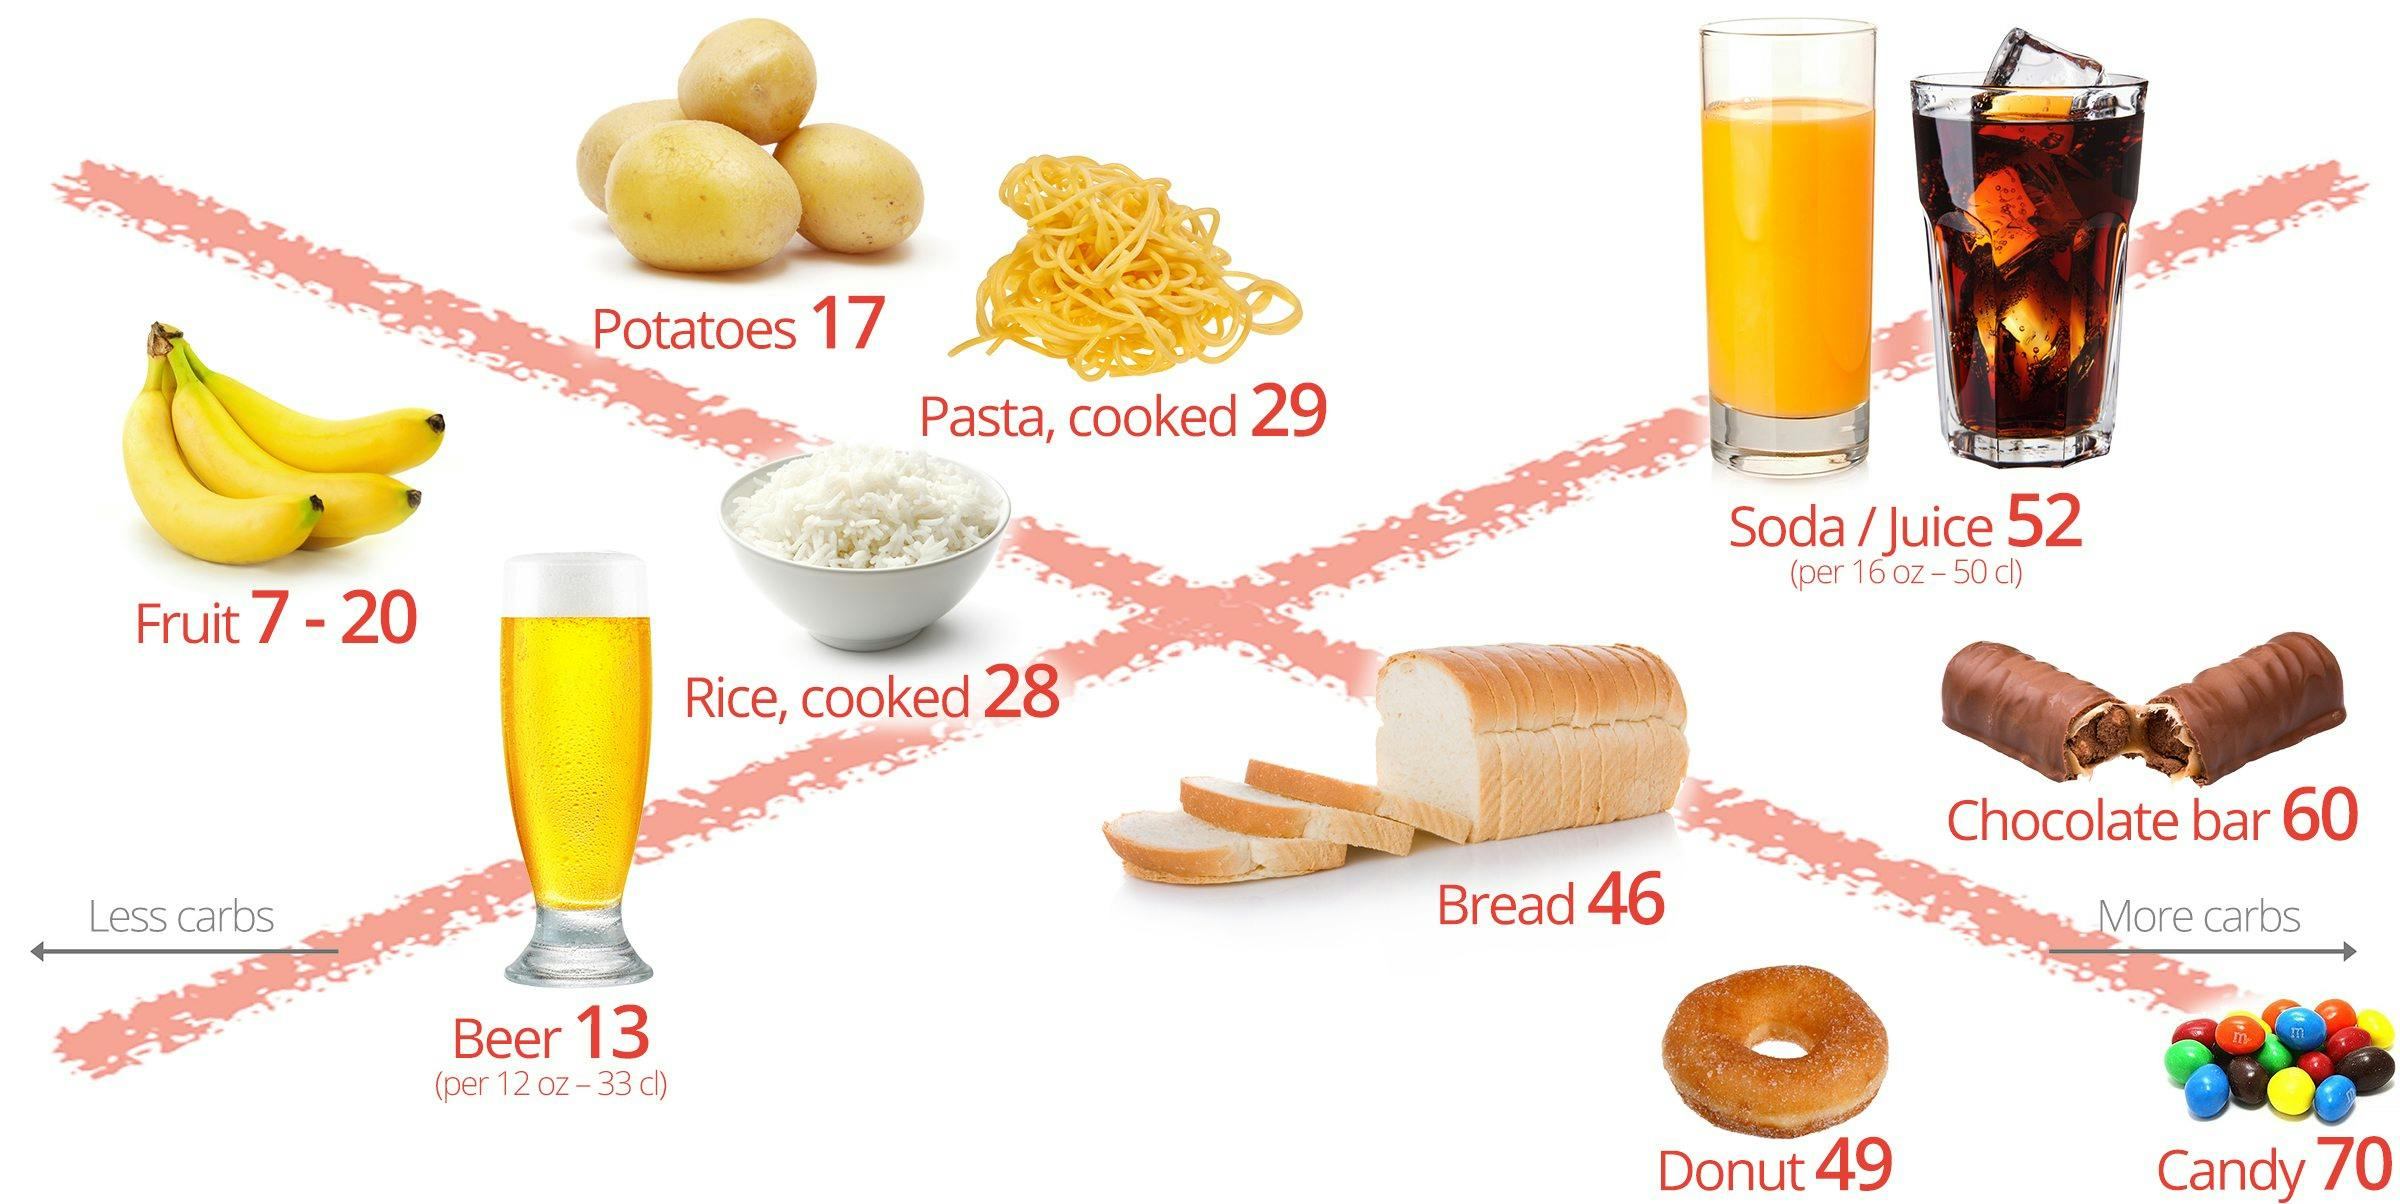 Foods to avoid on low carb: bread, pasta, rice, potatoes, fruit, beer, soda, juice, candy